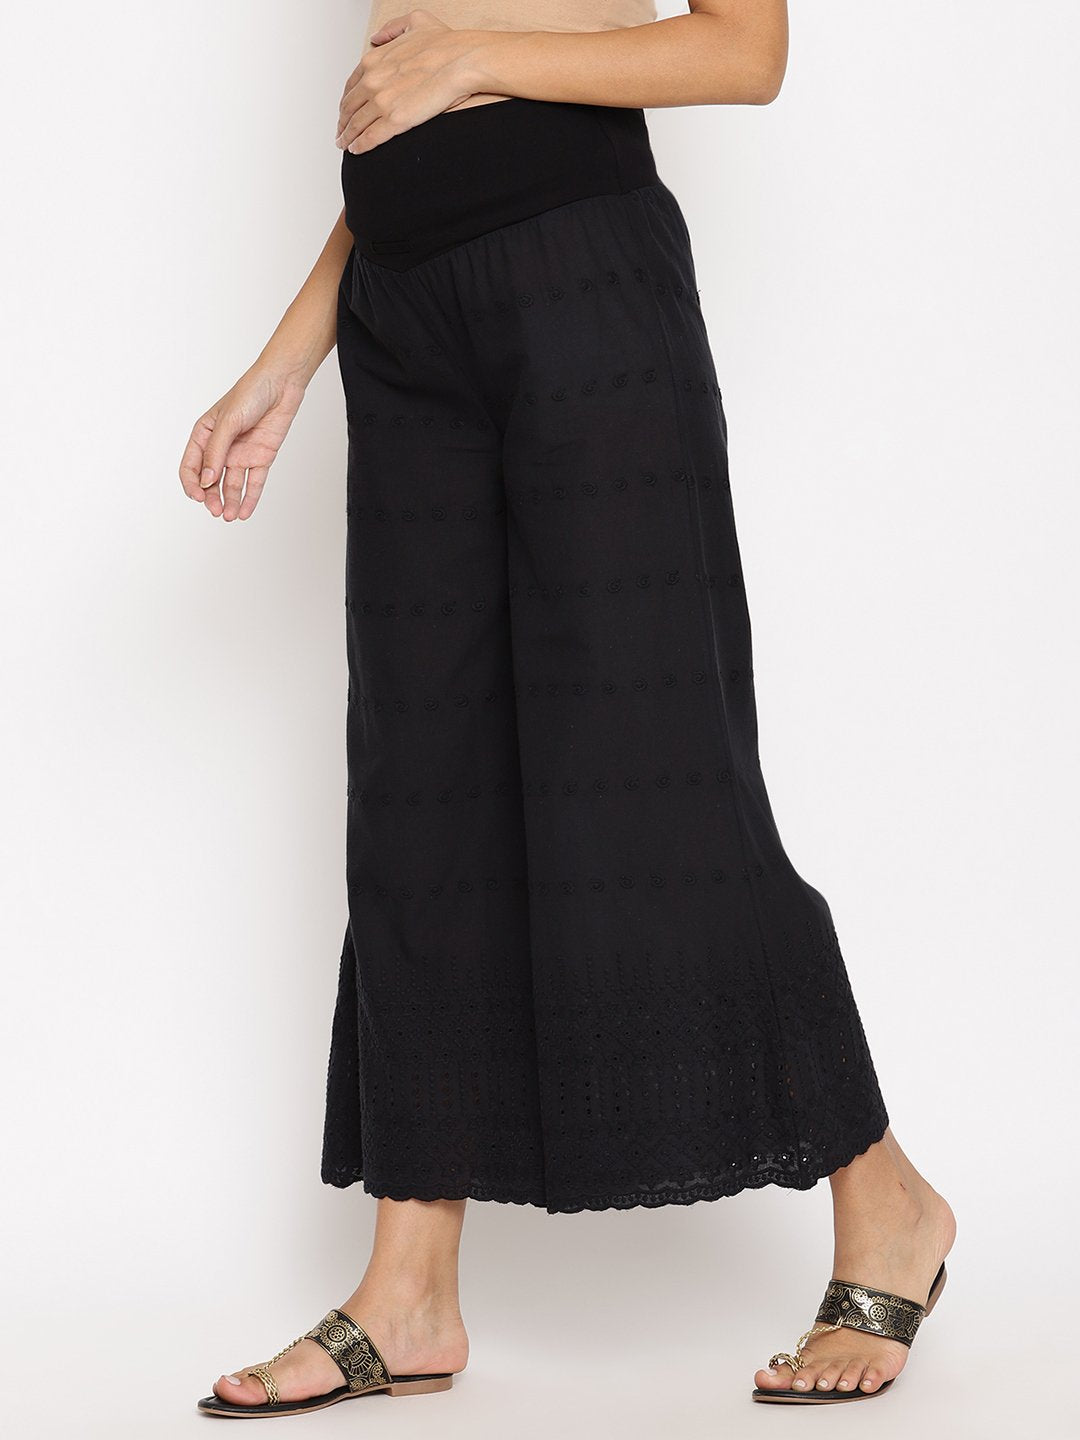 Prettygarden Lightweight Palazzo Pants Are a Must for Spring